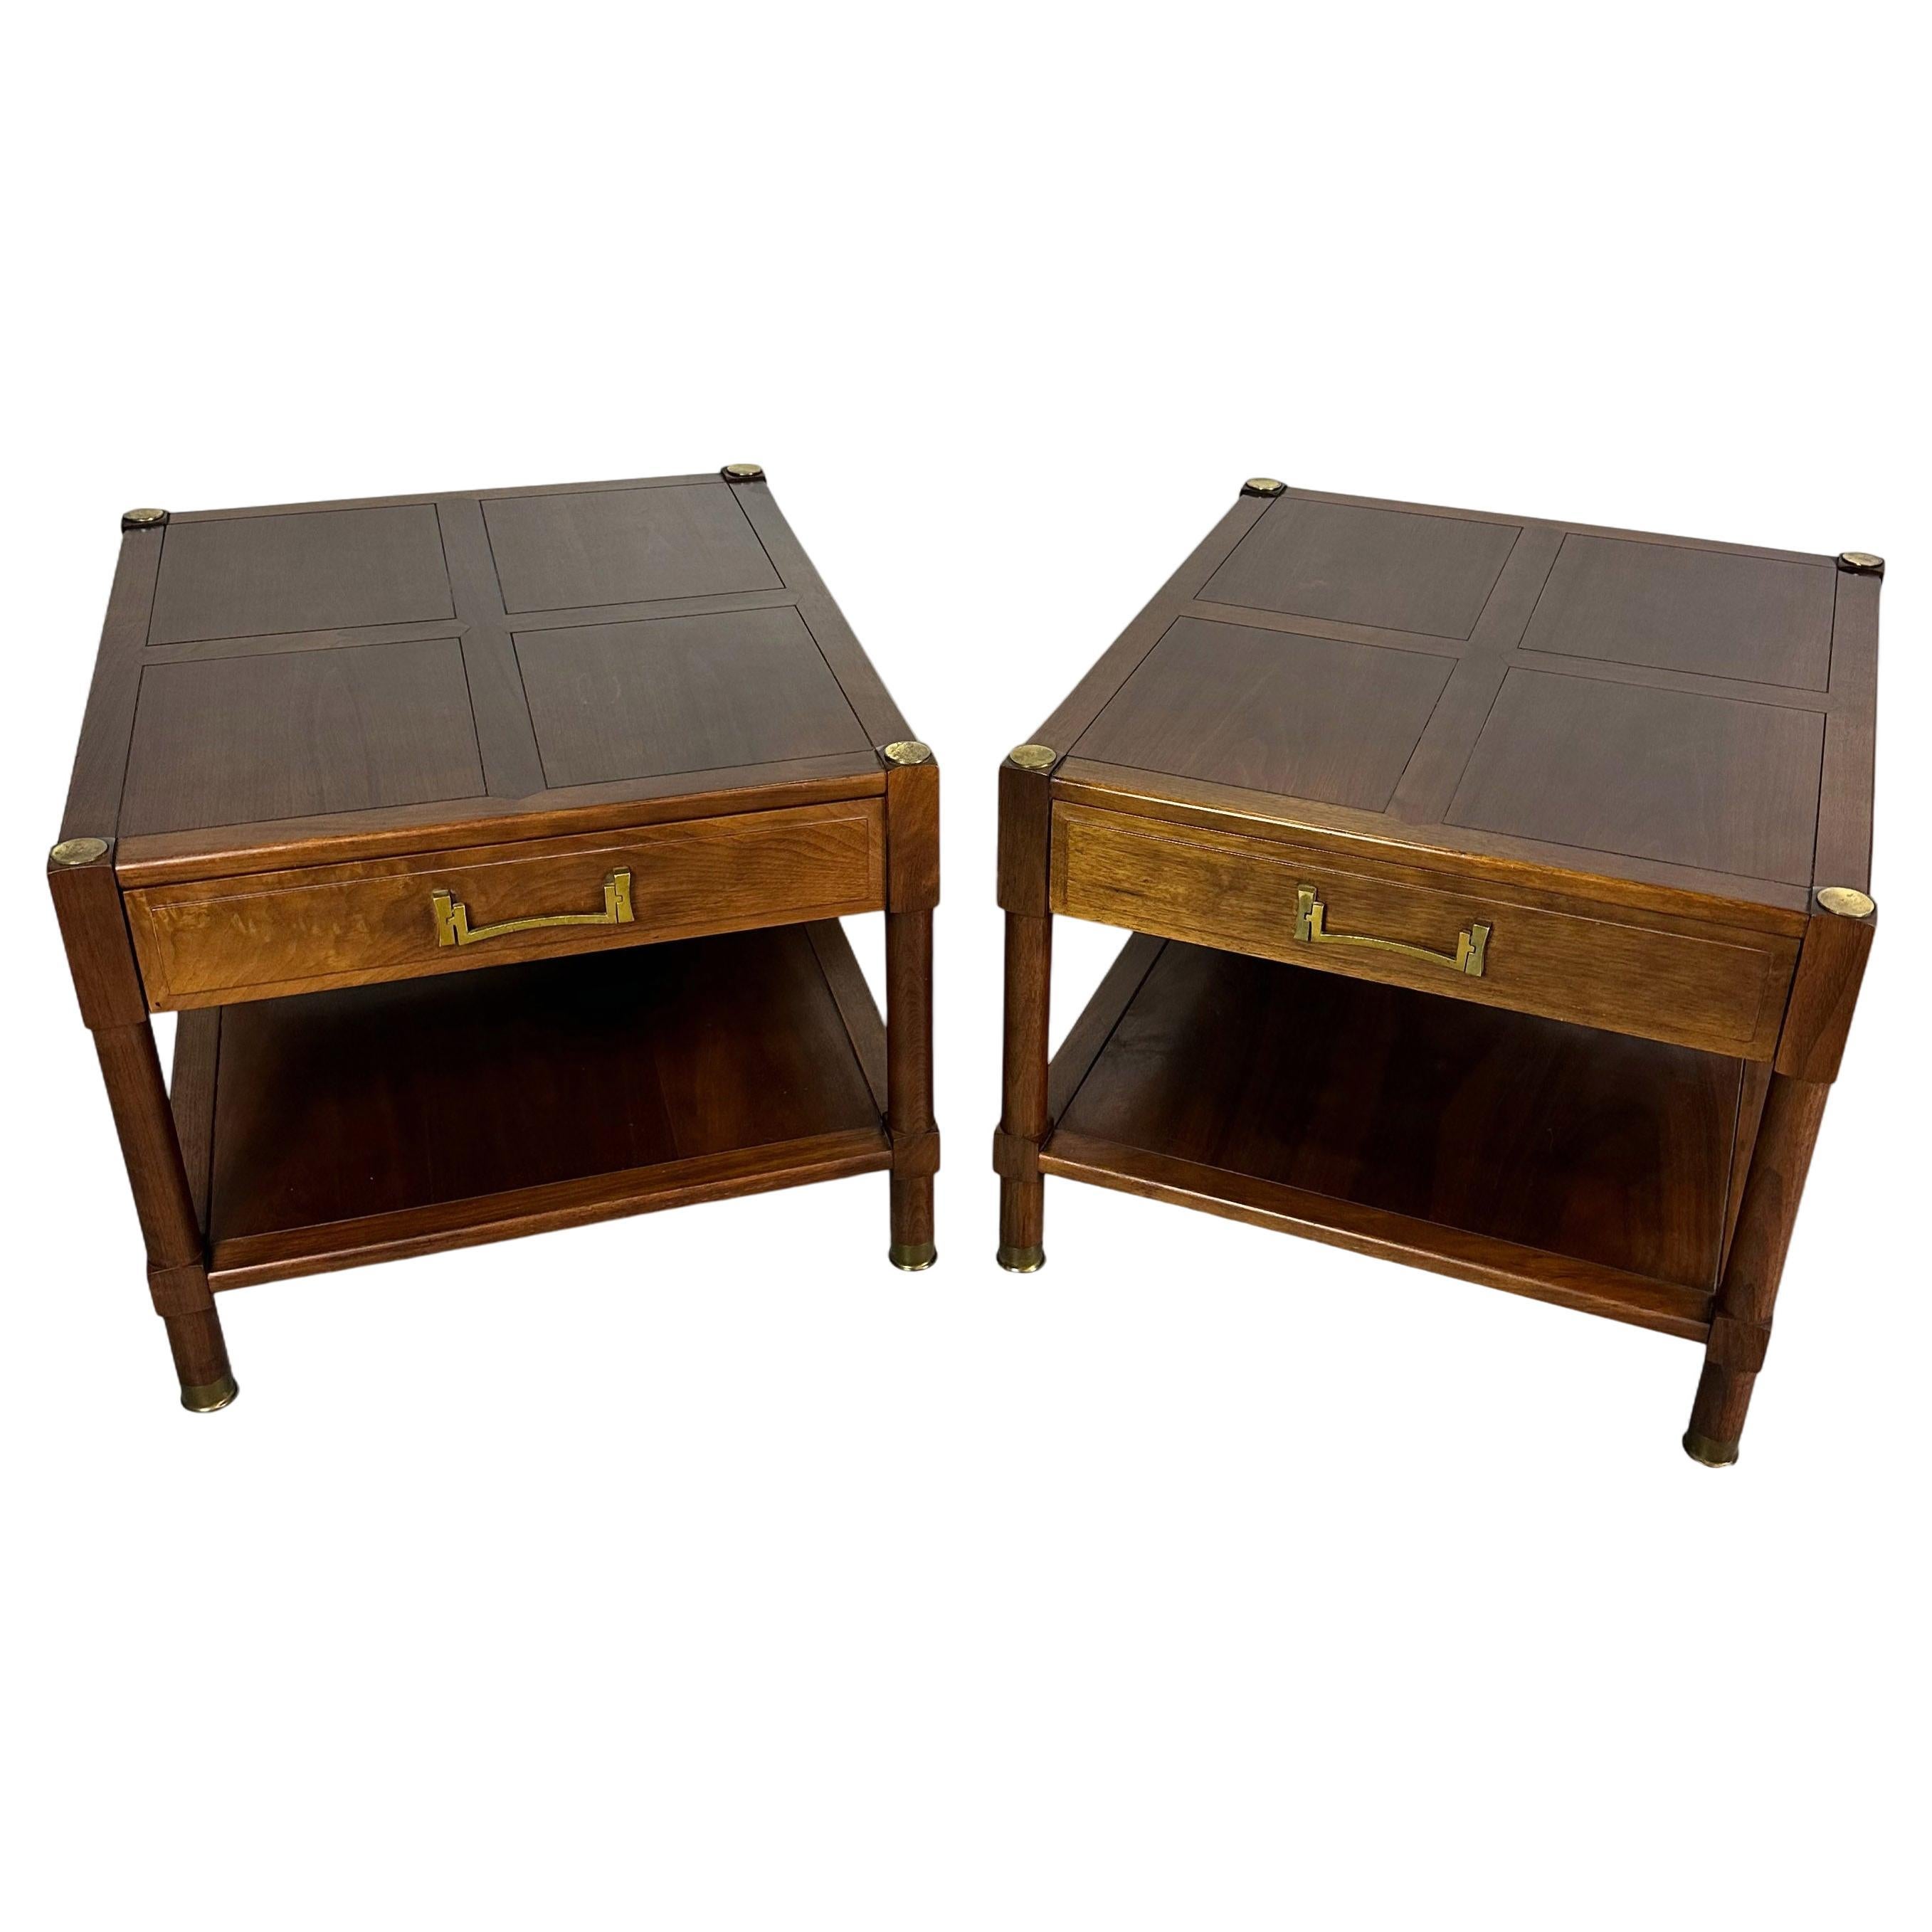 Pair of Heritage "Ming" Nightstands in Walnut with Brass Accents Mid Century